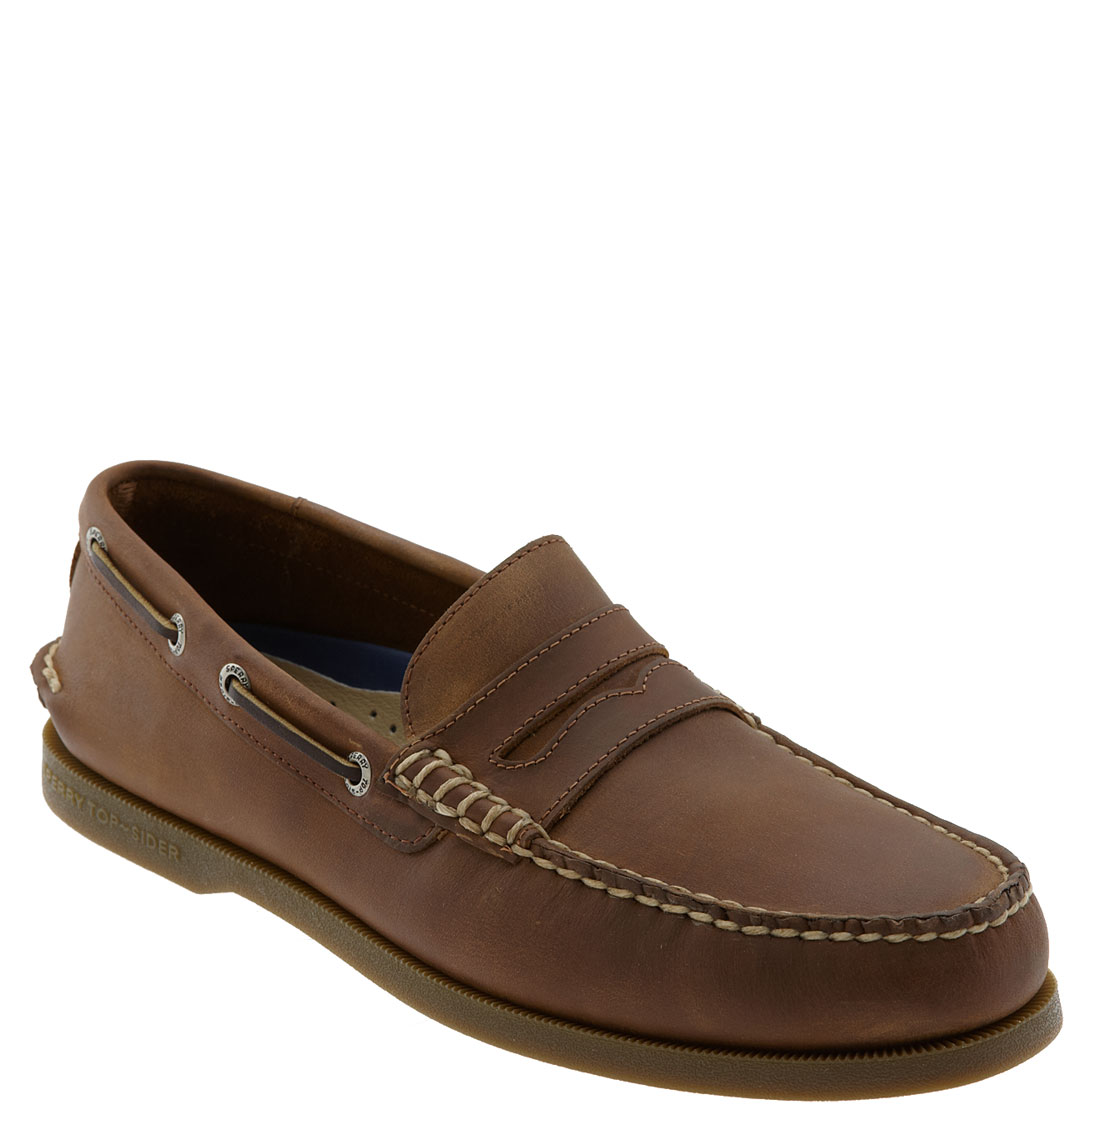 Sperry Top-sider Authentic Original Penny Loafers in Beige for Men ...